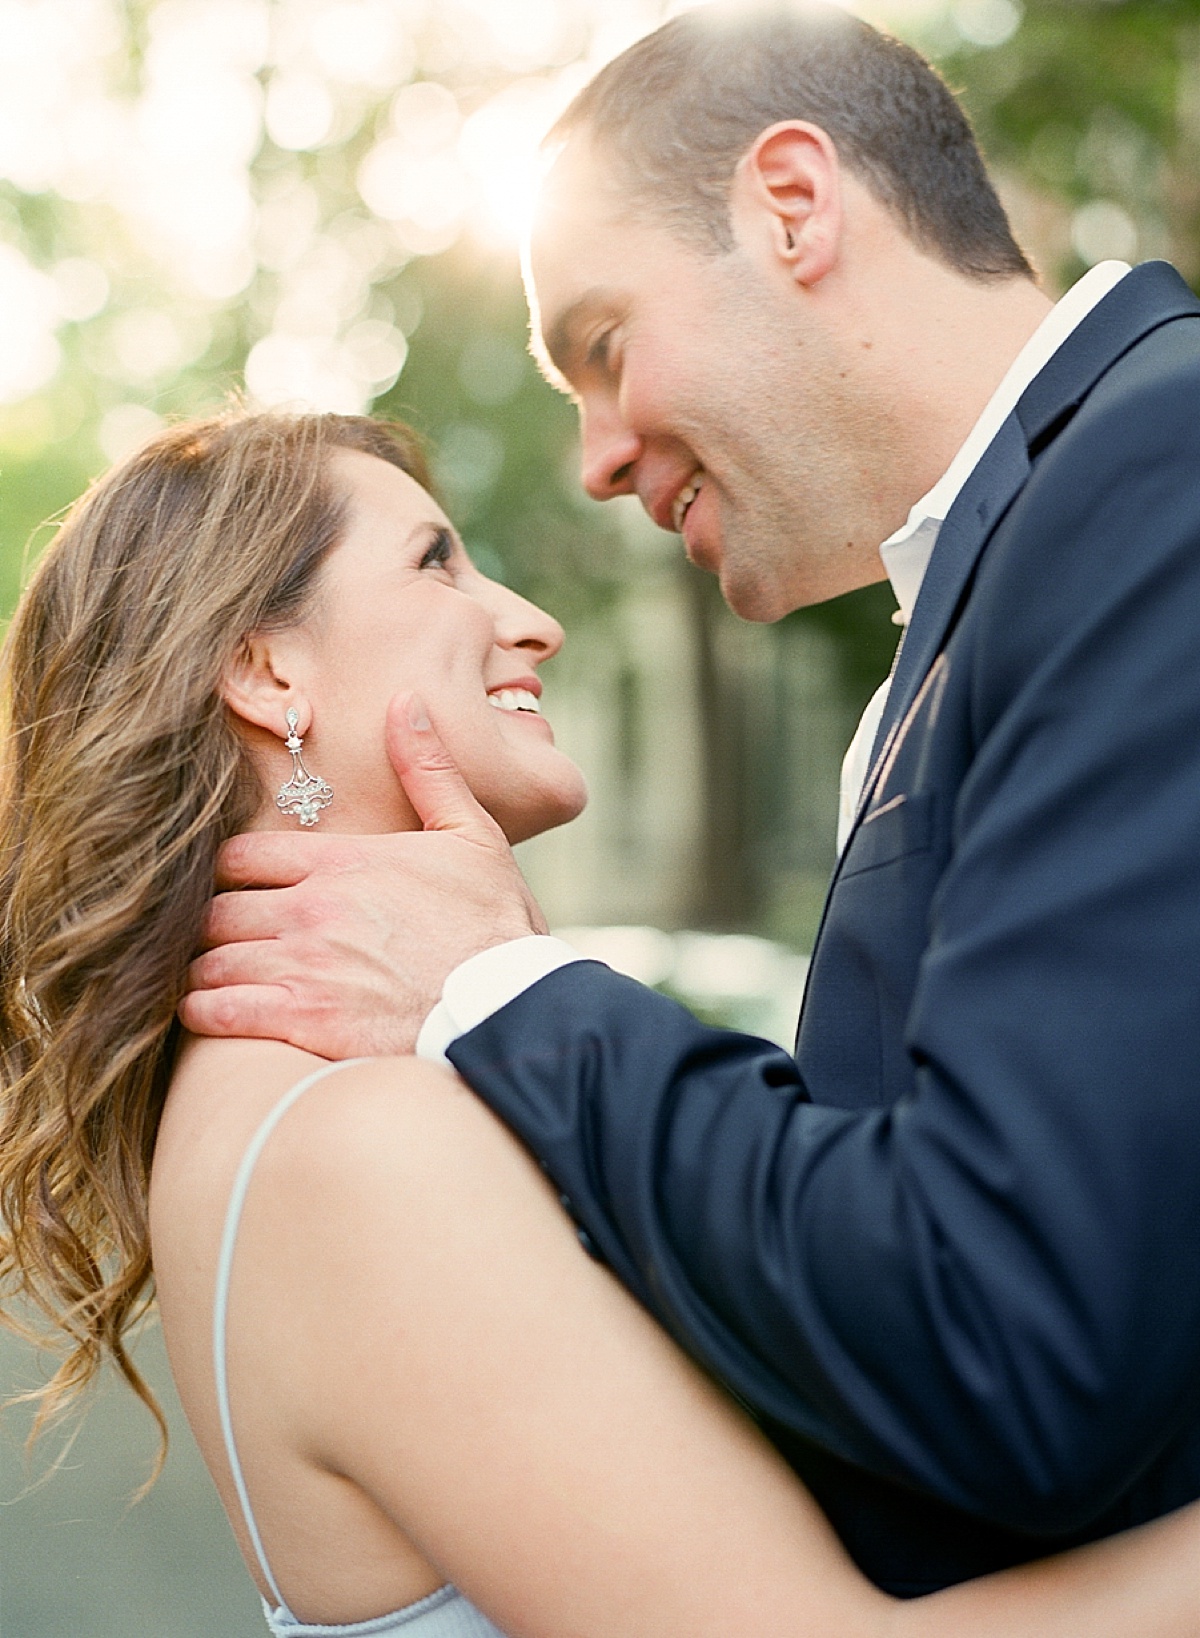 NW DC engagement portraits | Abby Grace Photography